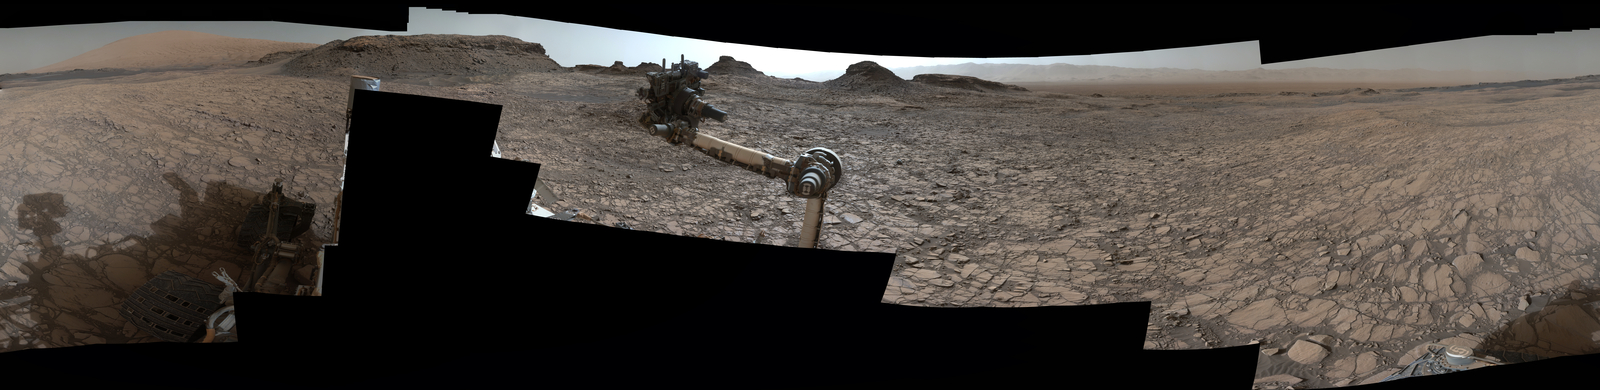 Rover's Panorama of Entrance to 'Murray Buttes' on Mars